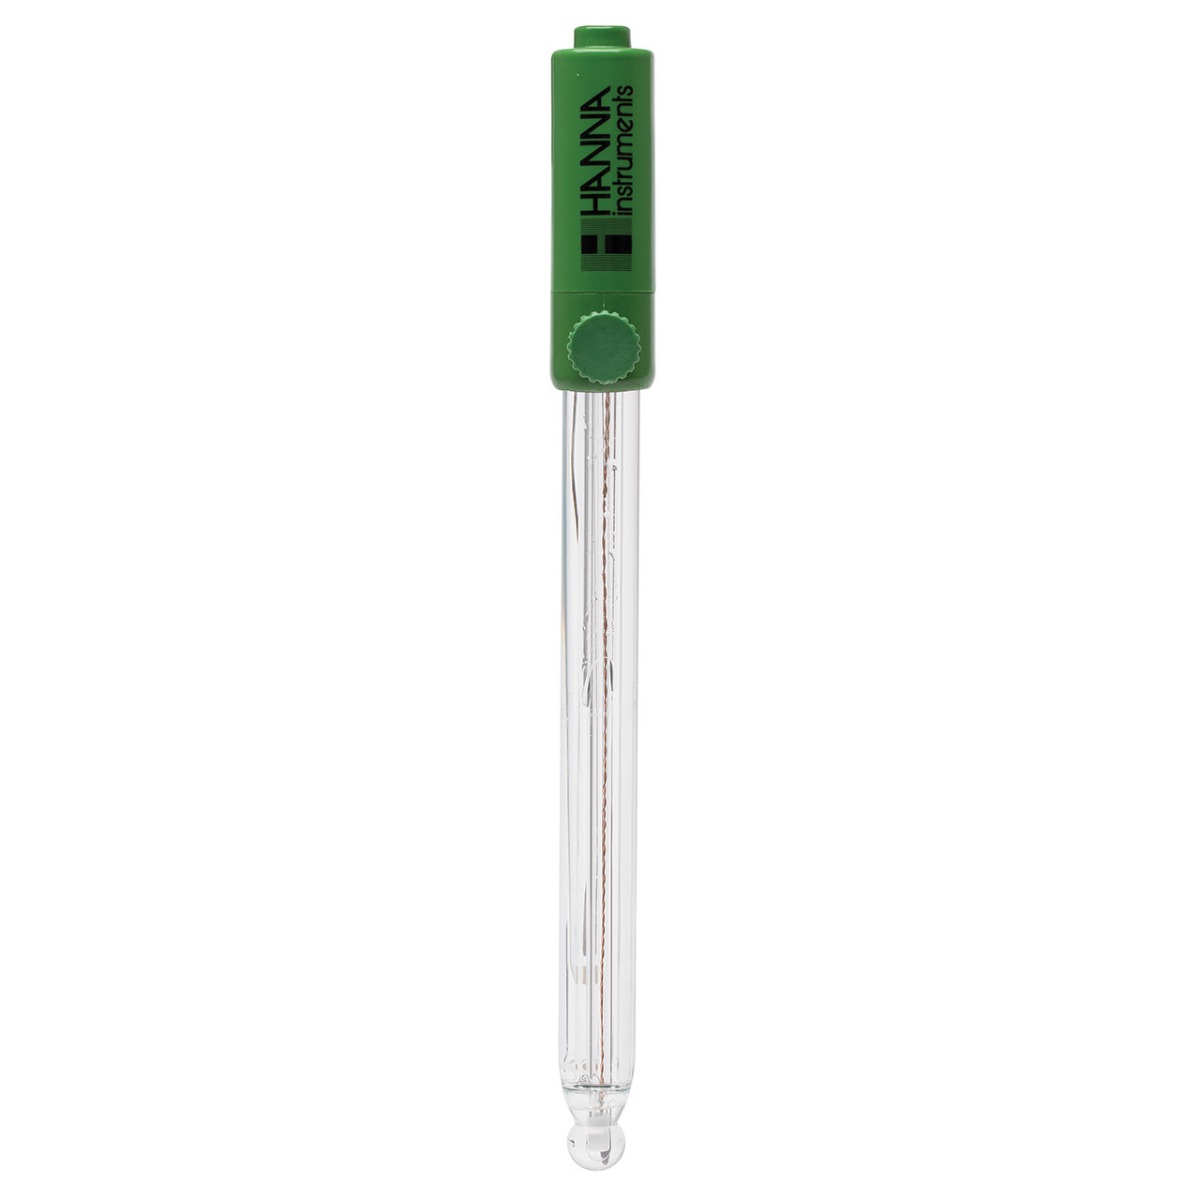 Refillable Glass Body pH Electrode with Quick Connect DIN Connector - HI11313